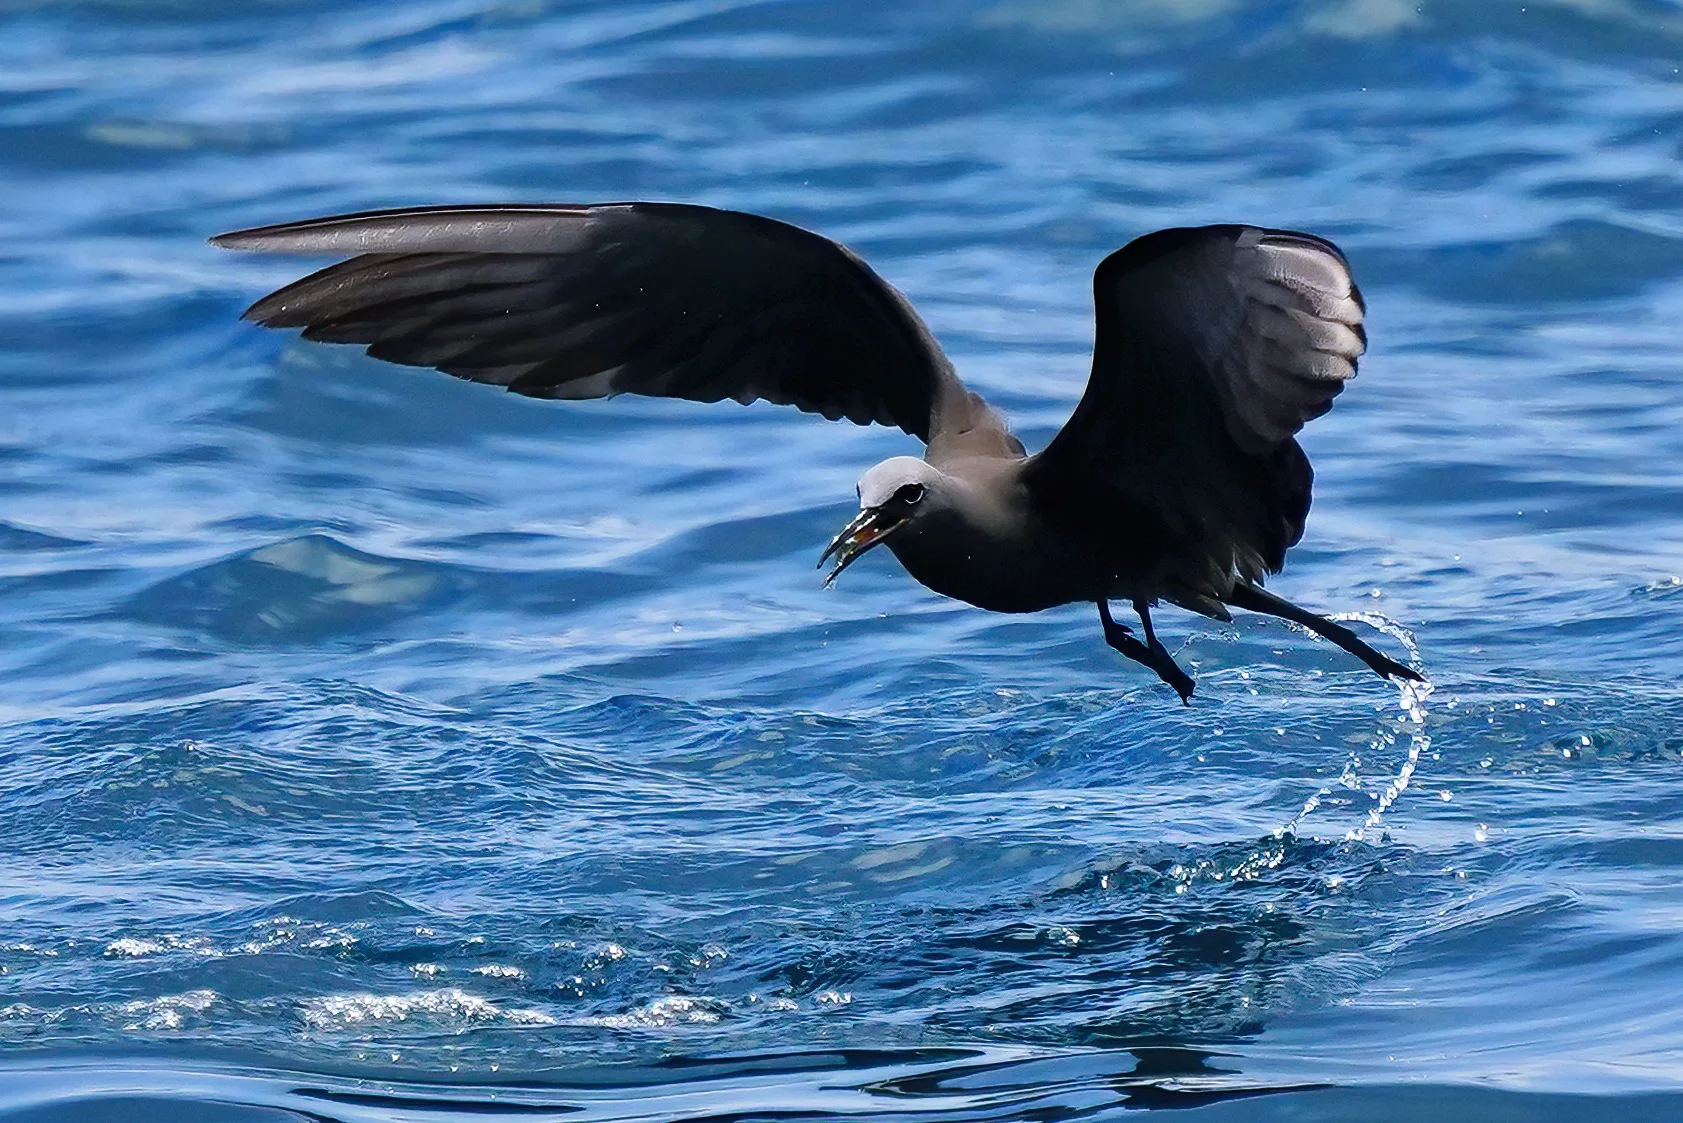 Galapagos Islands Yacht-Based Tour & Guided Photography Experience - Brown noddy